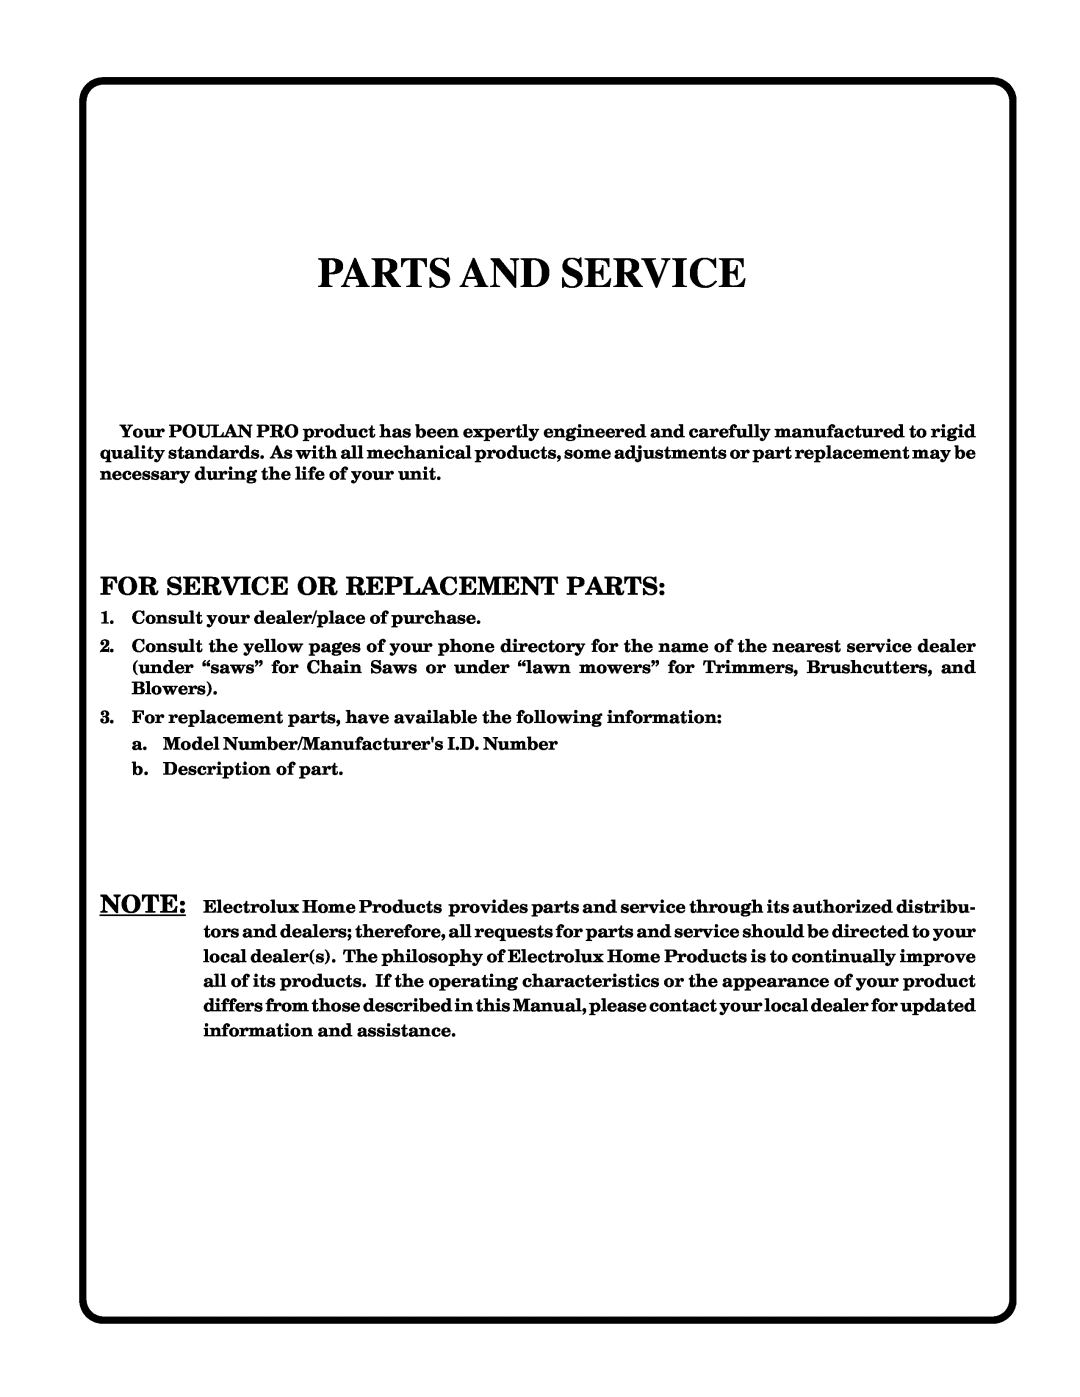 Poulan PRK17G42STB owner manual Parts And Service, For Service Or Replacement Parts 